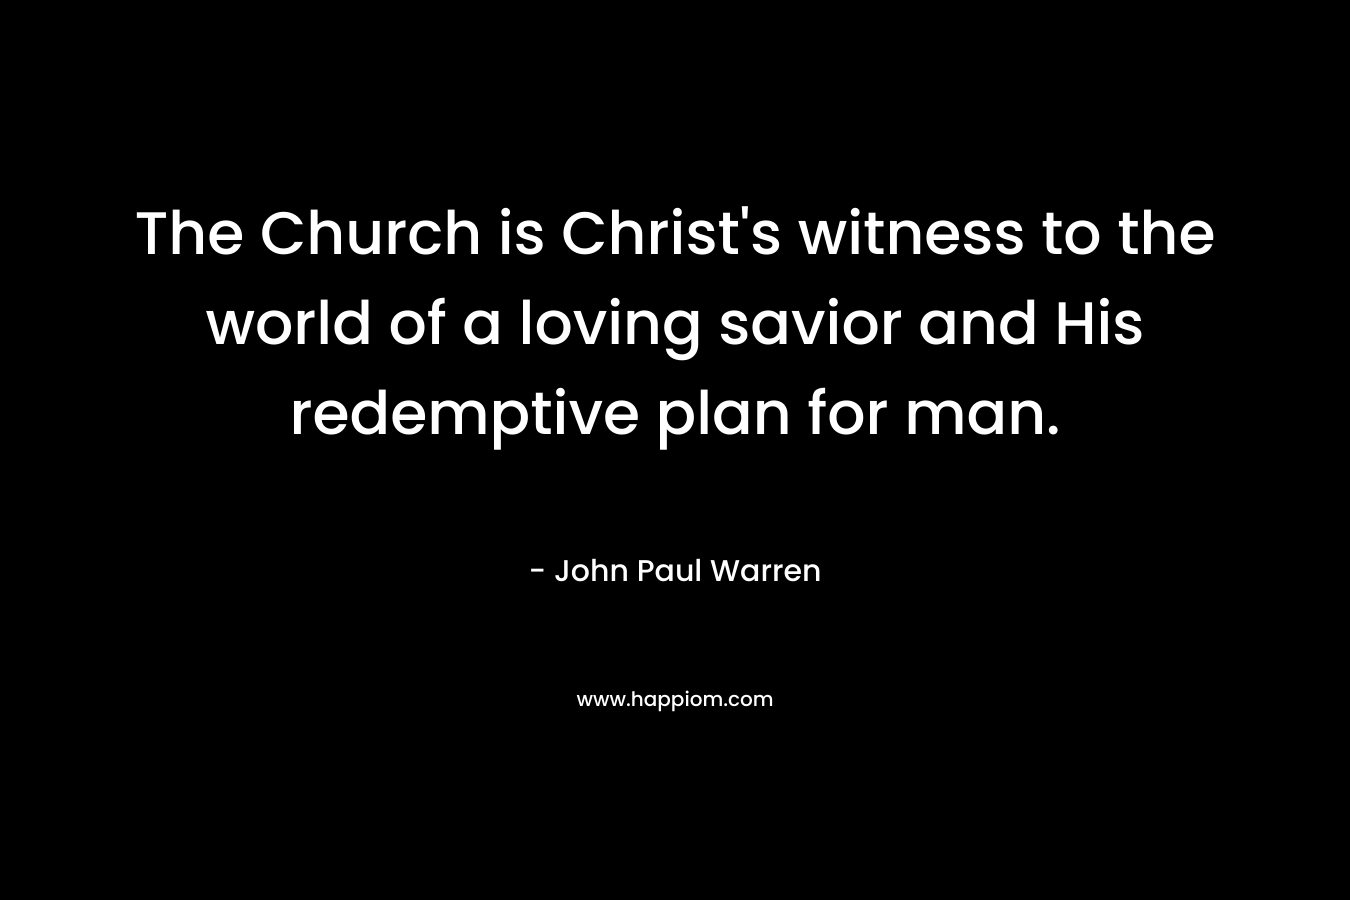 The Church is Christ’s witness to the world of a loving savior and His redemptive plan for man. – John Paul Warren